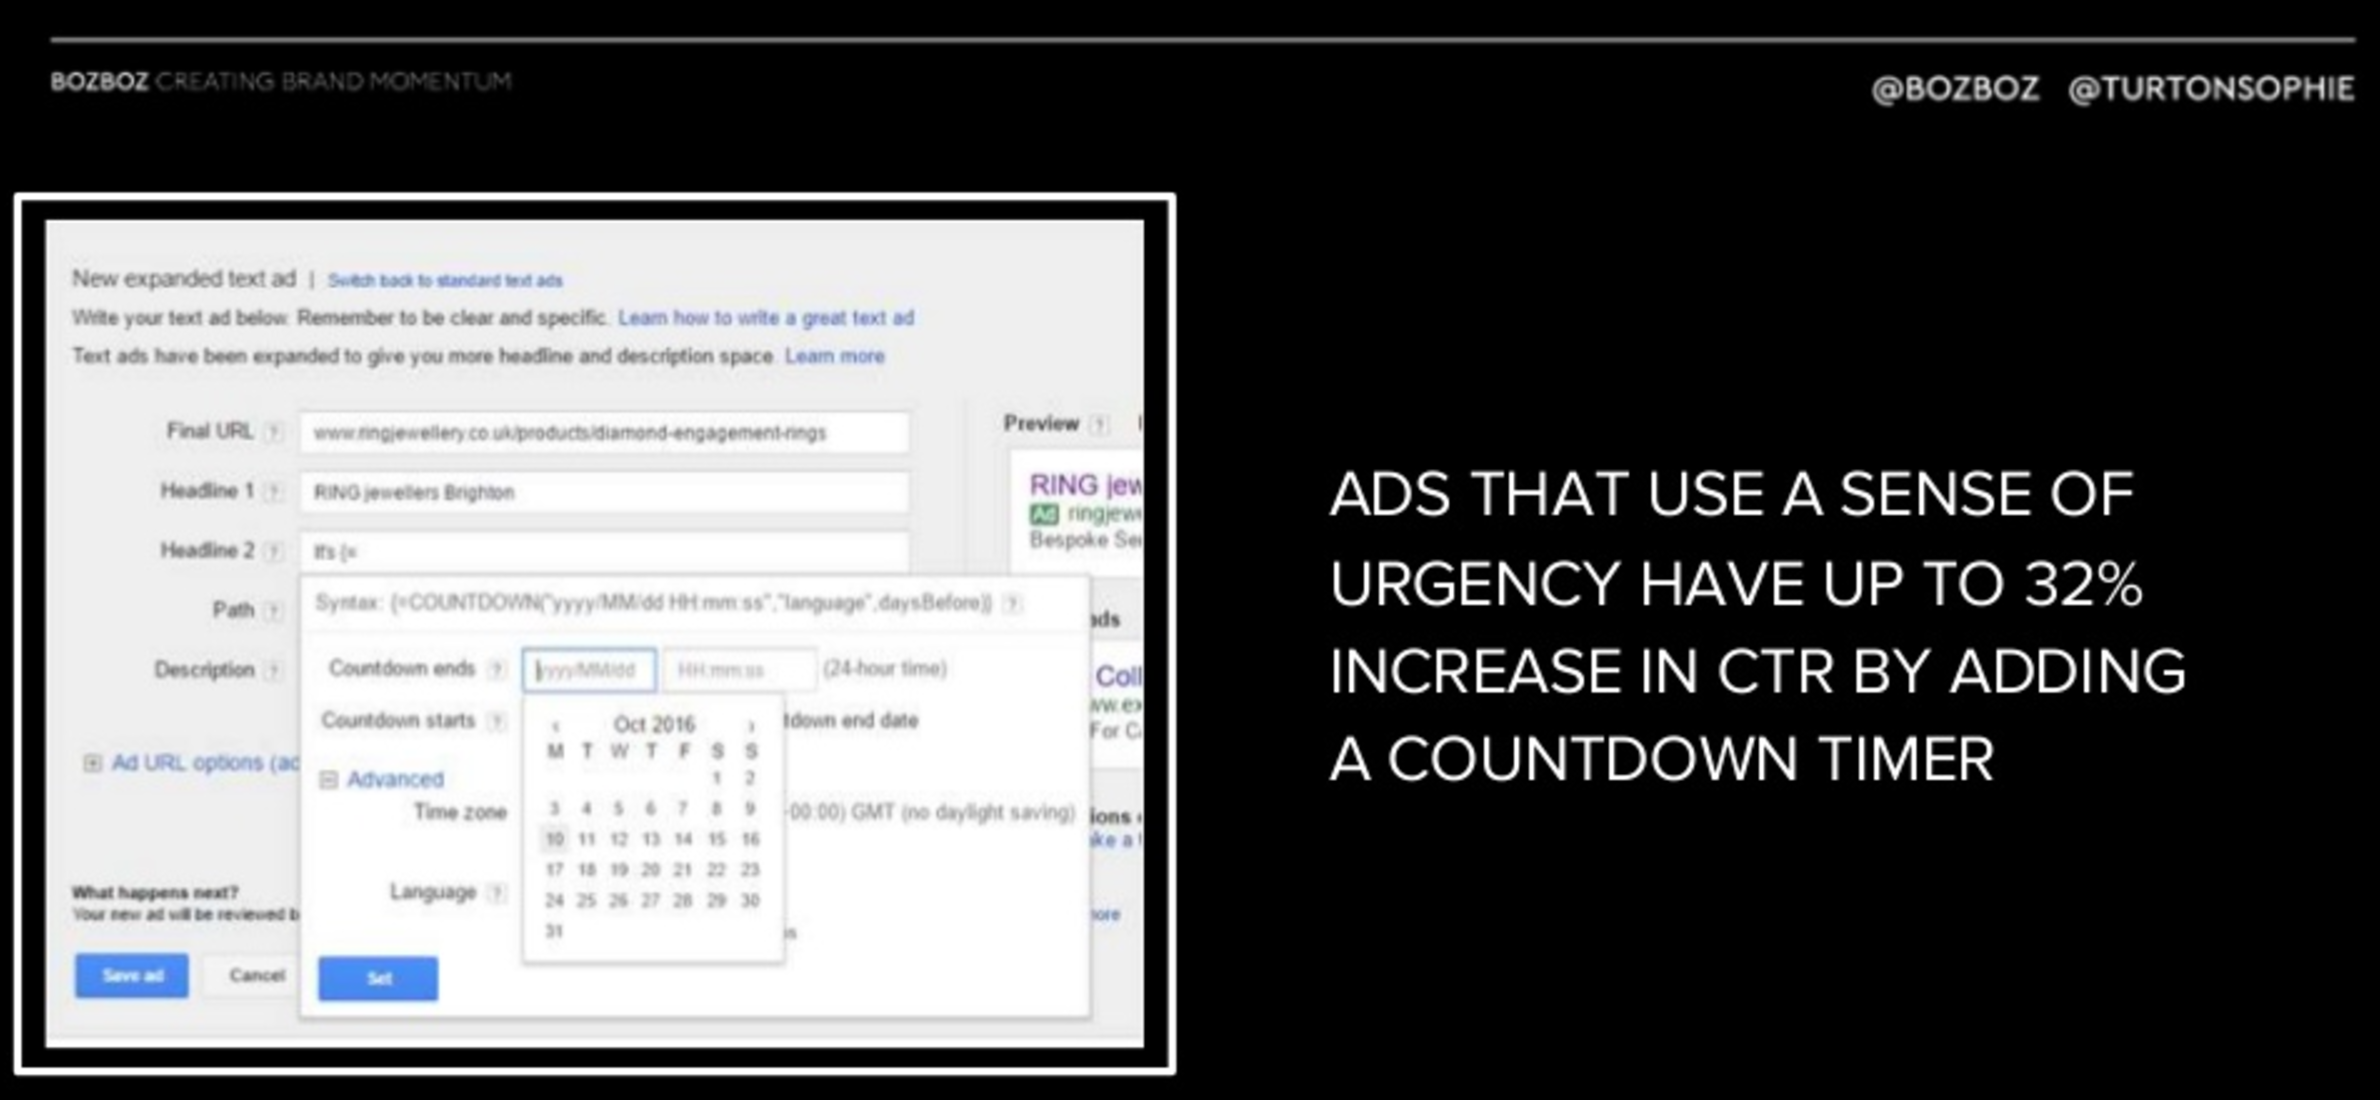 In fact it has been observed that ads that use a sense of urgency have up to increase in CTR when a countdown timer is added